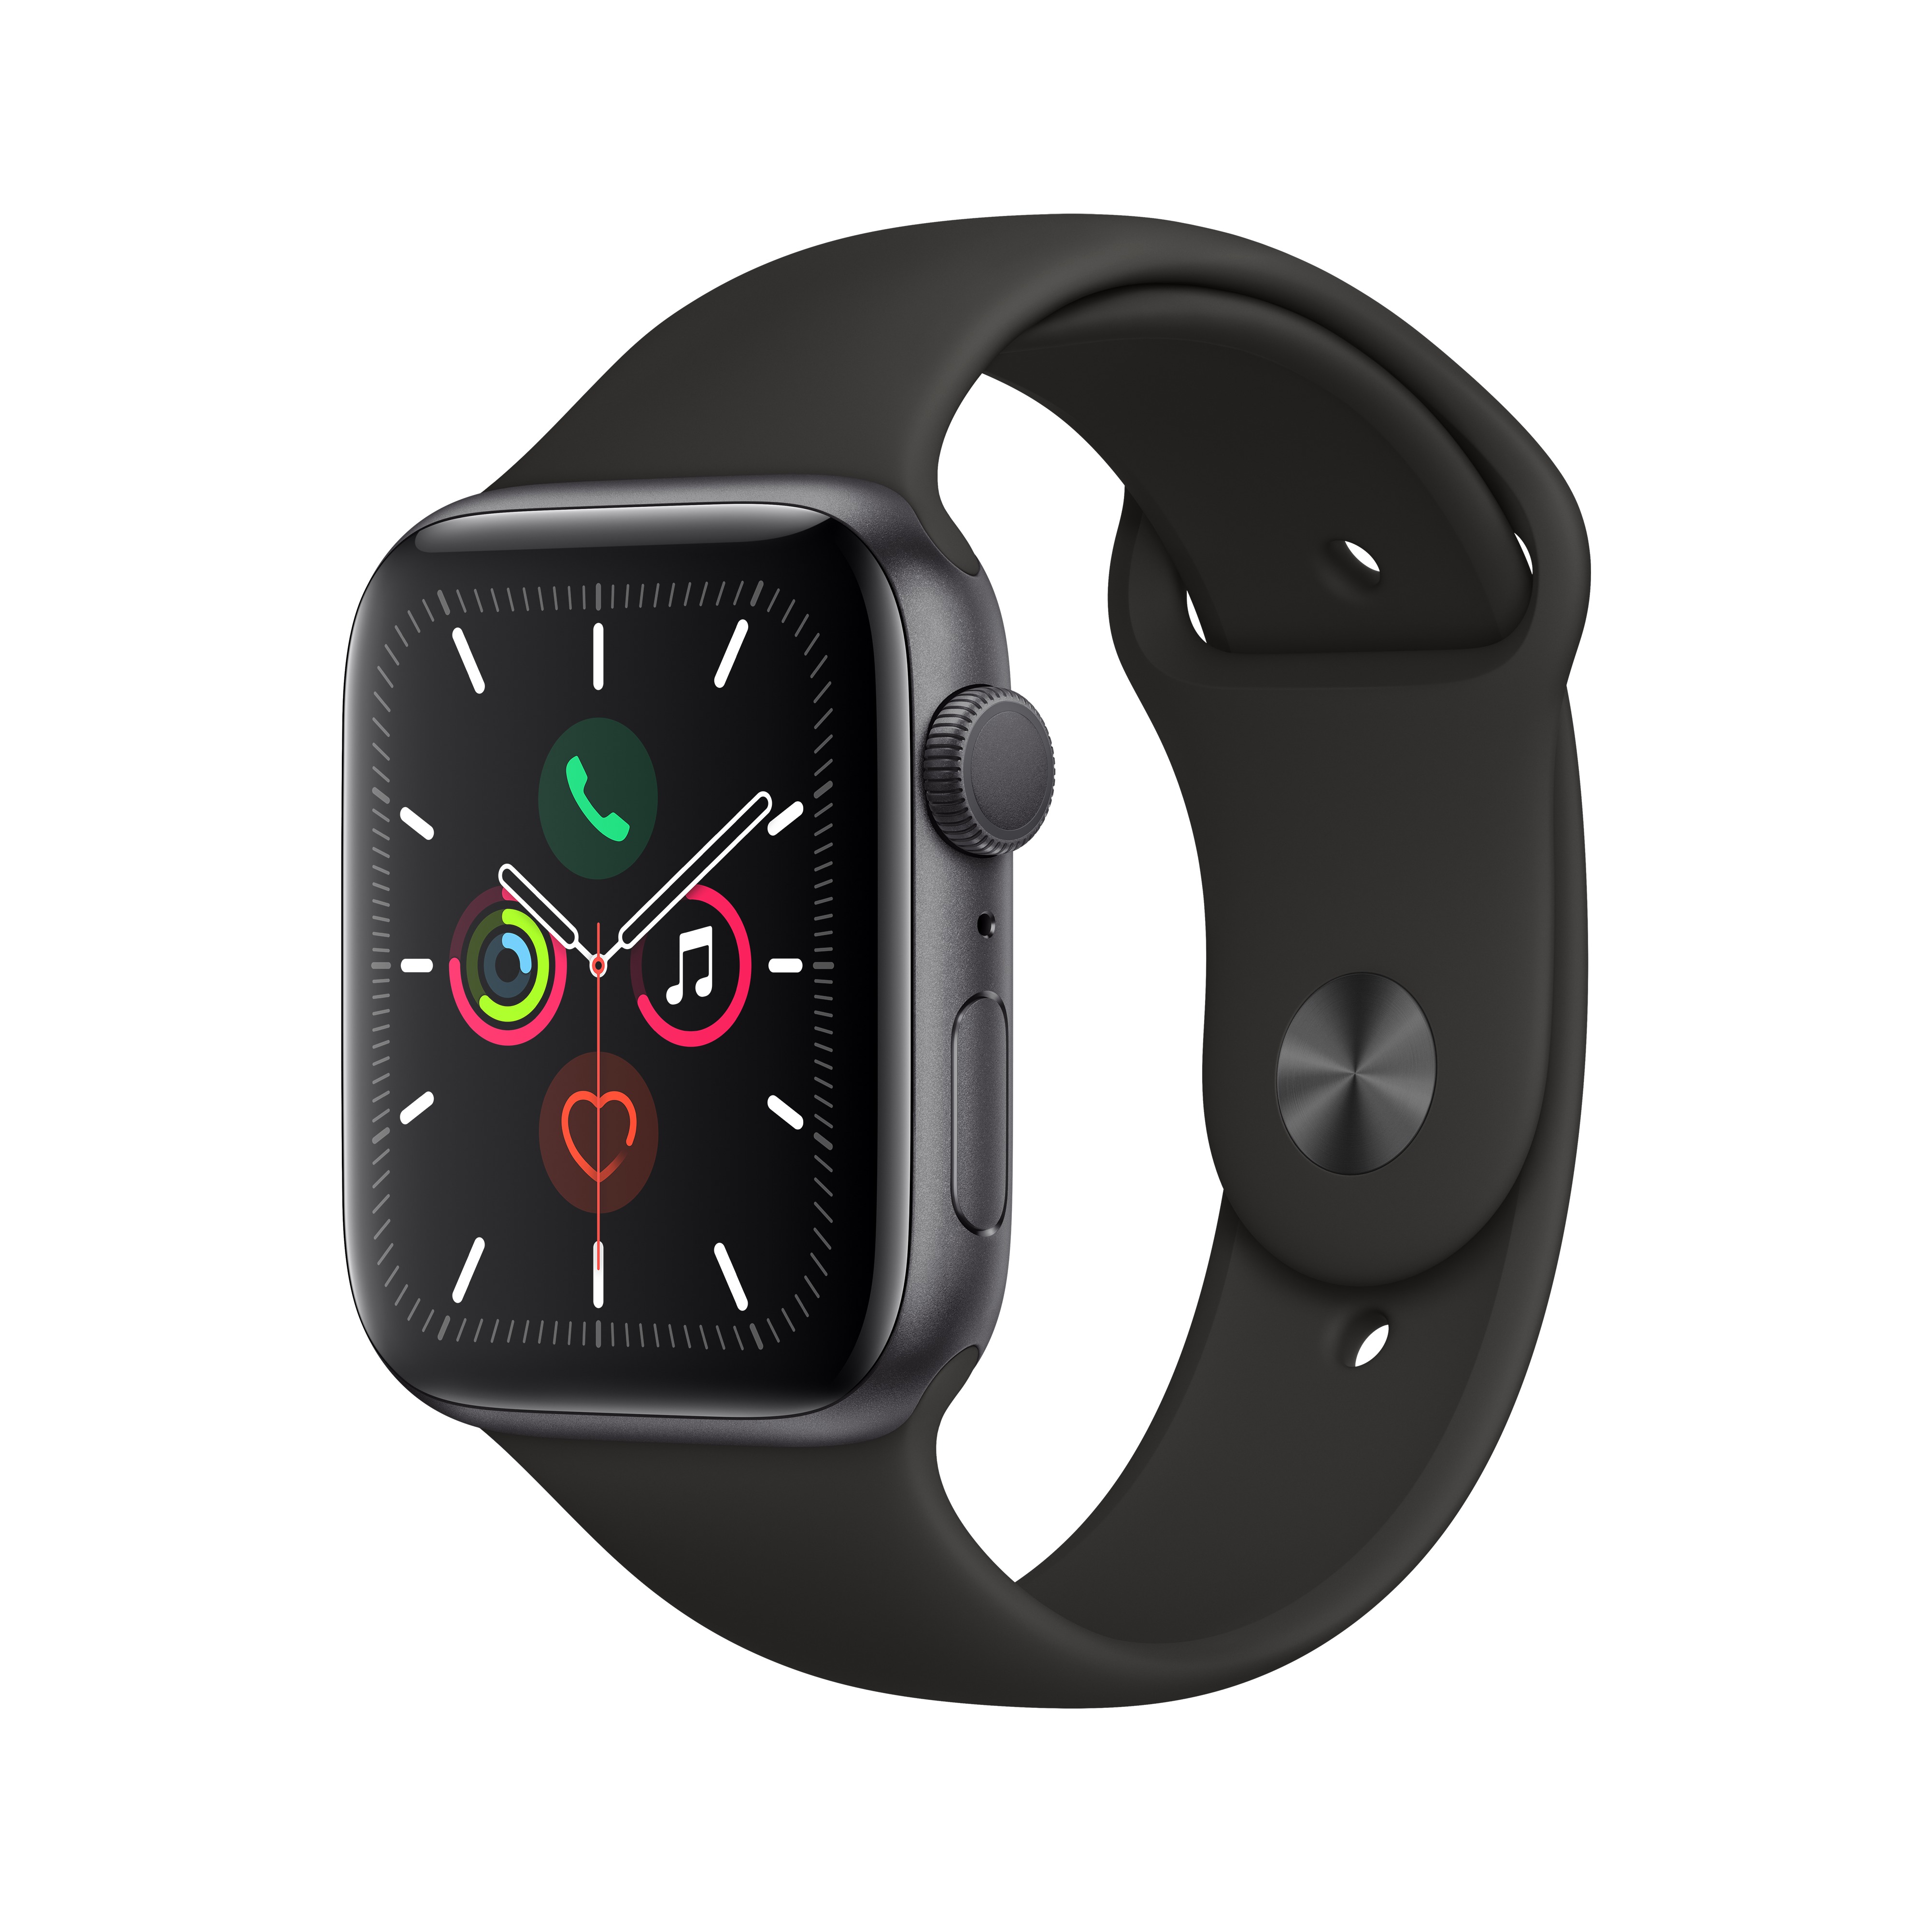 Apple Watch Series 5 GPS, 44mm Space Gray Aluminum Case with Black Sport Band - S/M & M/L - image 1 of 6